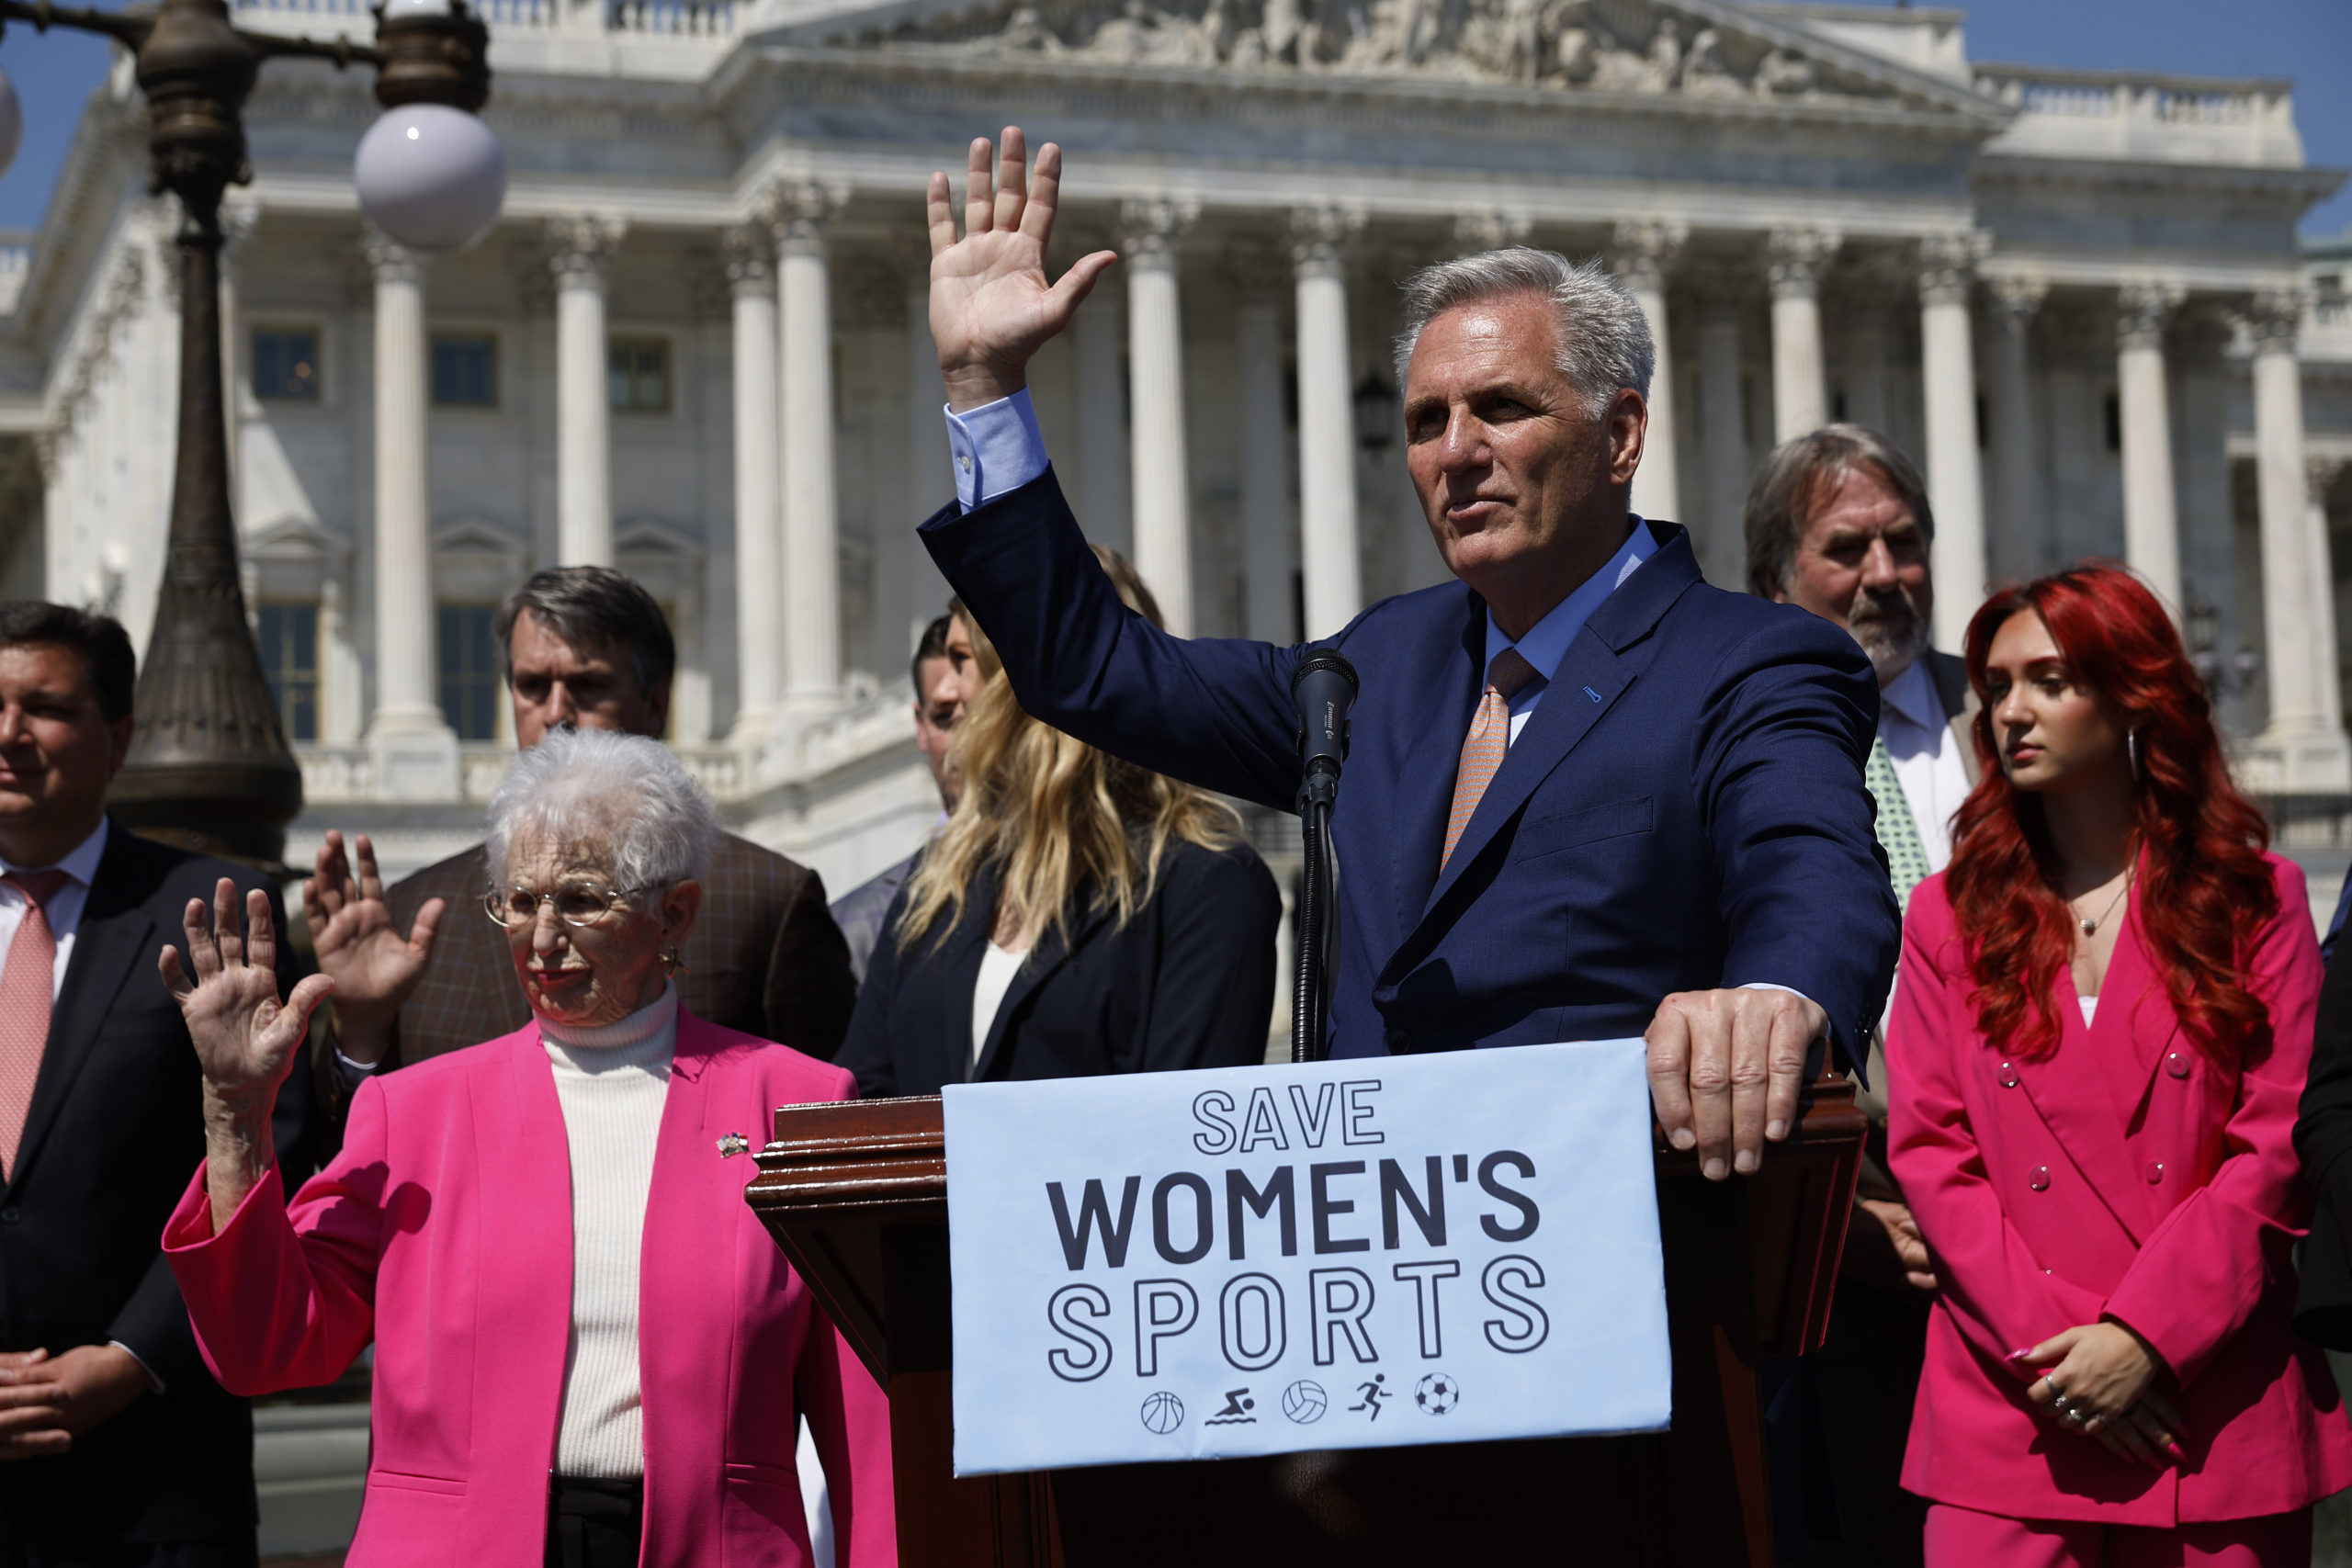 Speaker of the House Kevin McCarthy (R-CA) (C) and Rep. Virginia Foxx (R-VA) (L) raise their hands when asked if they know a transgender woman during an event to celebrate the House passing The Protection Of Women And Girls In Sports Act outside the U.S. Capitol on April 20, 2023 in Washington, DC. President Joe Biden has promised to veto the legislation, which defines sex as 'based solely on a person’s reproductive biology and genetics at birth' and would ban all transgender women and girls from competing in female school sports. (Photo by Chip Somodevilla/Getty Images)